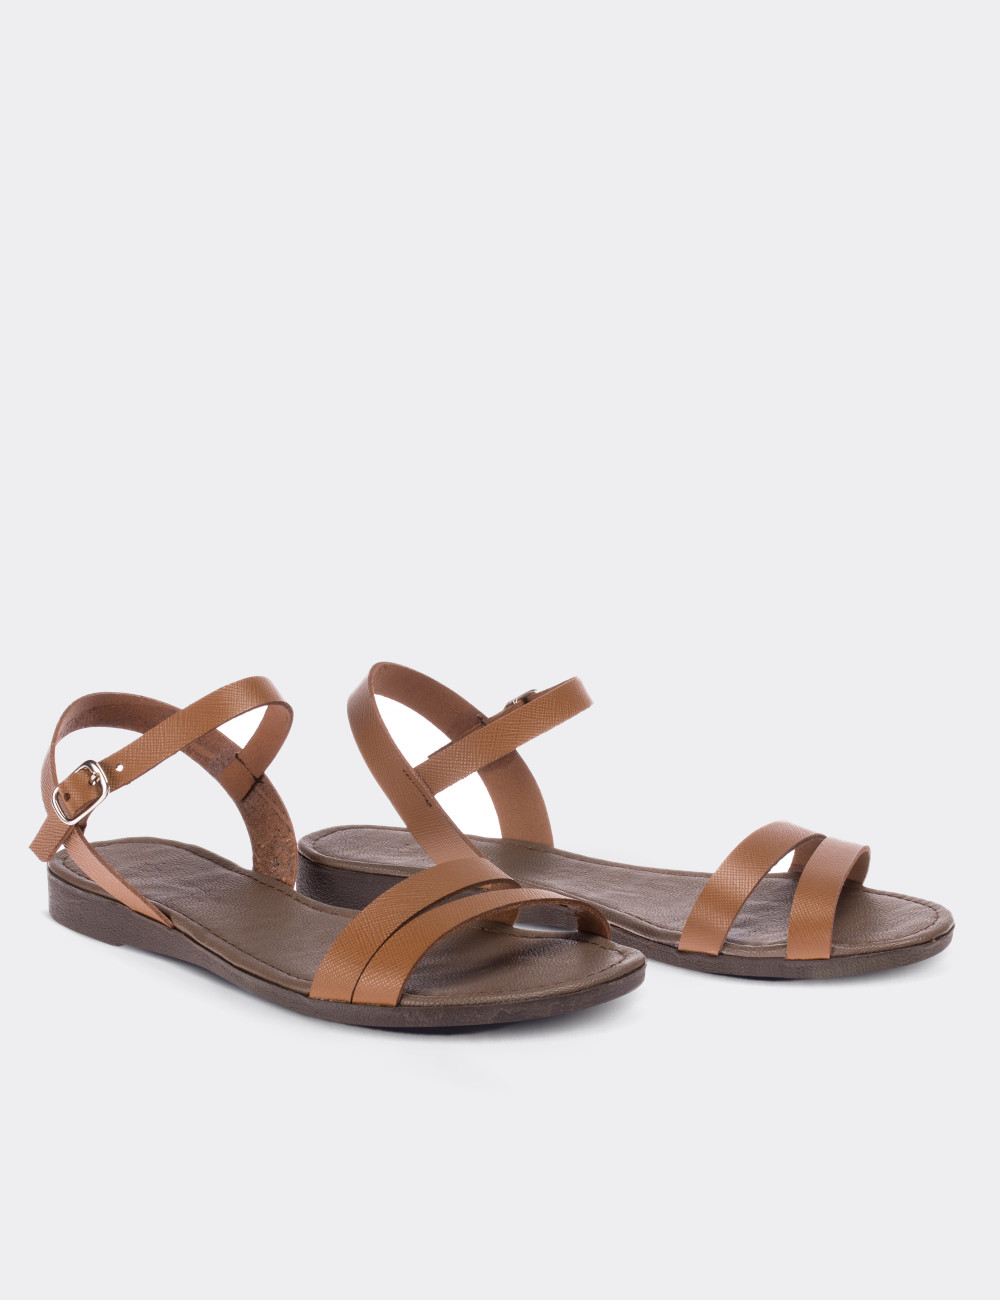 Tan  Leather Sandals - 02031ZTBAC01